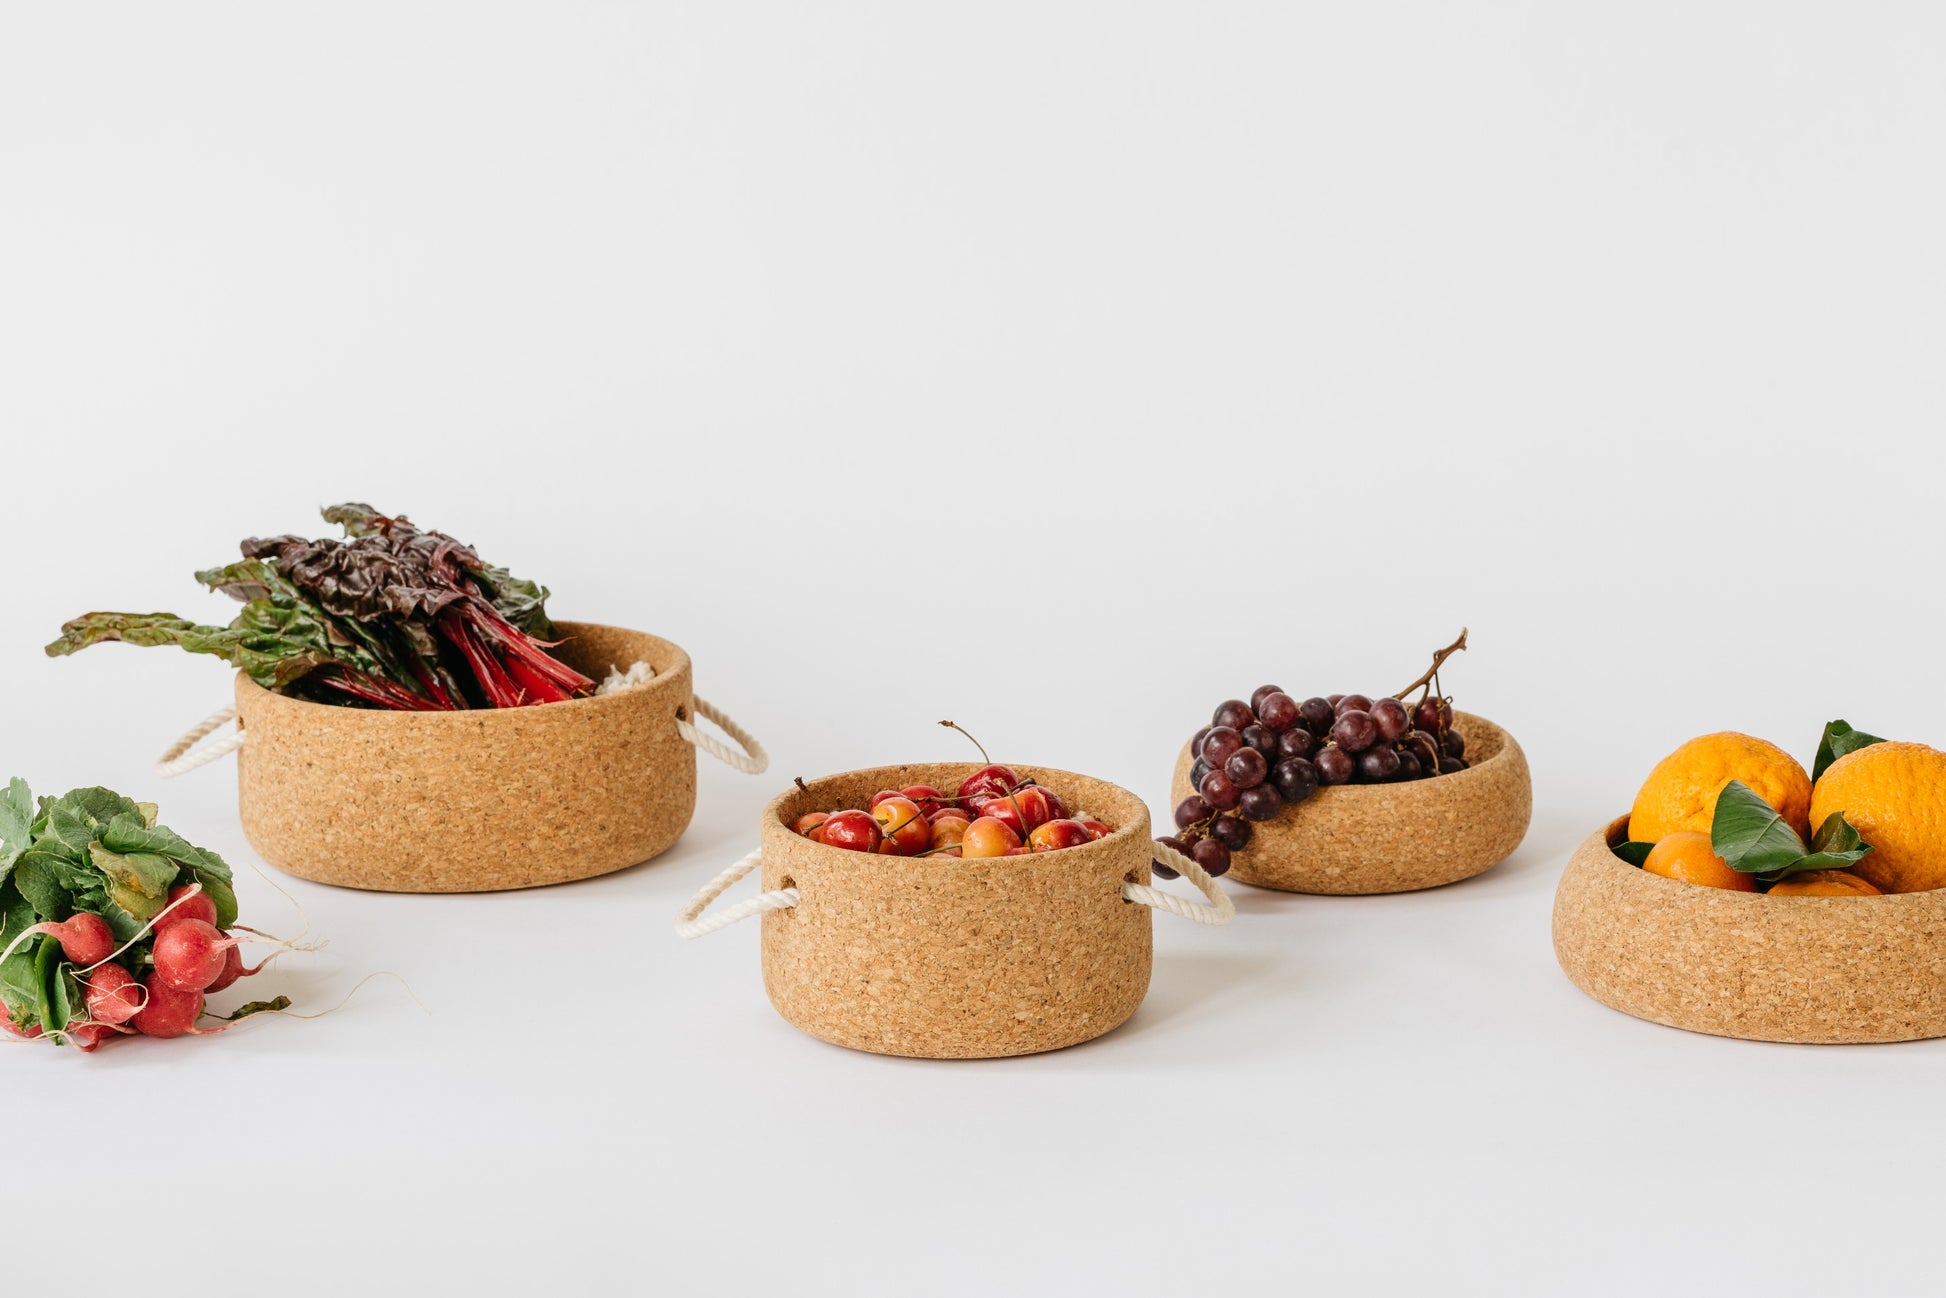 Cork bowls by Melanie Abrantes Designs. Large and small bowls with rope handles. Other cork bowls with no handles. Bowls are filled with fruits and vegetables.